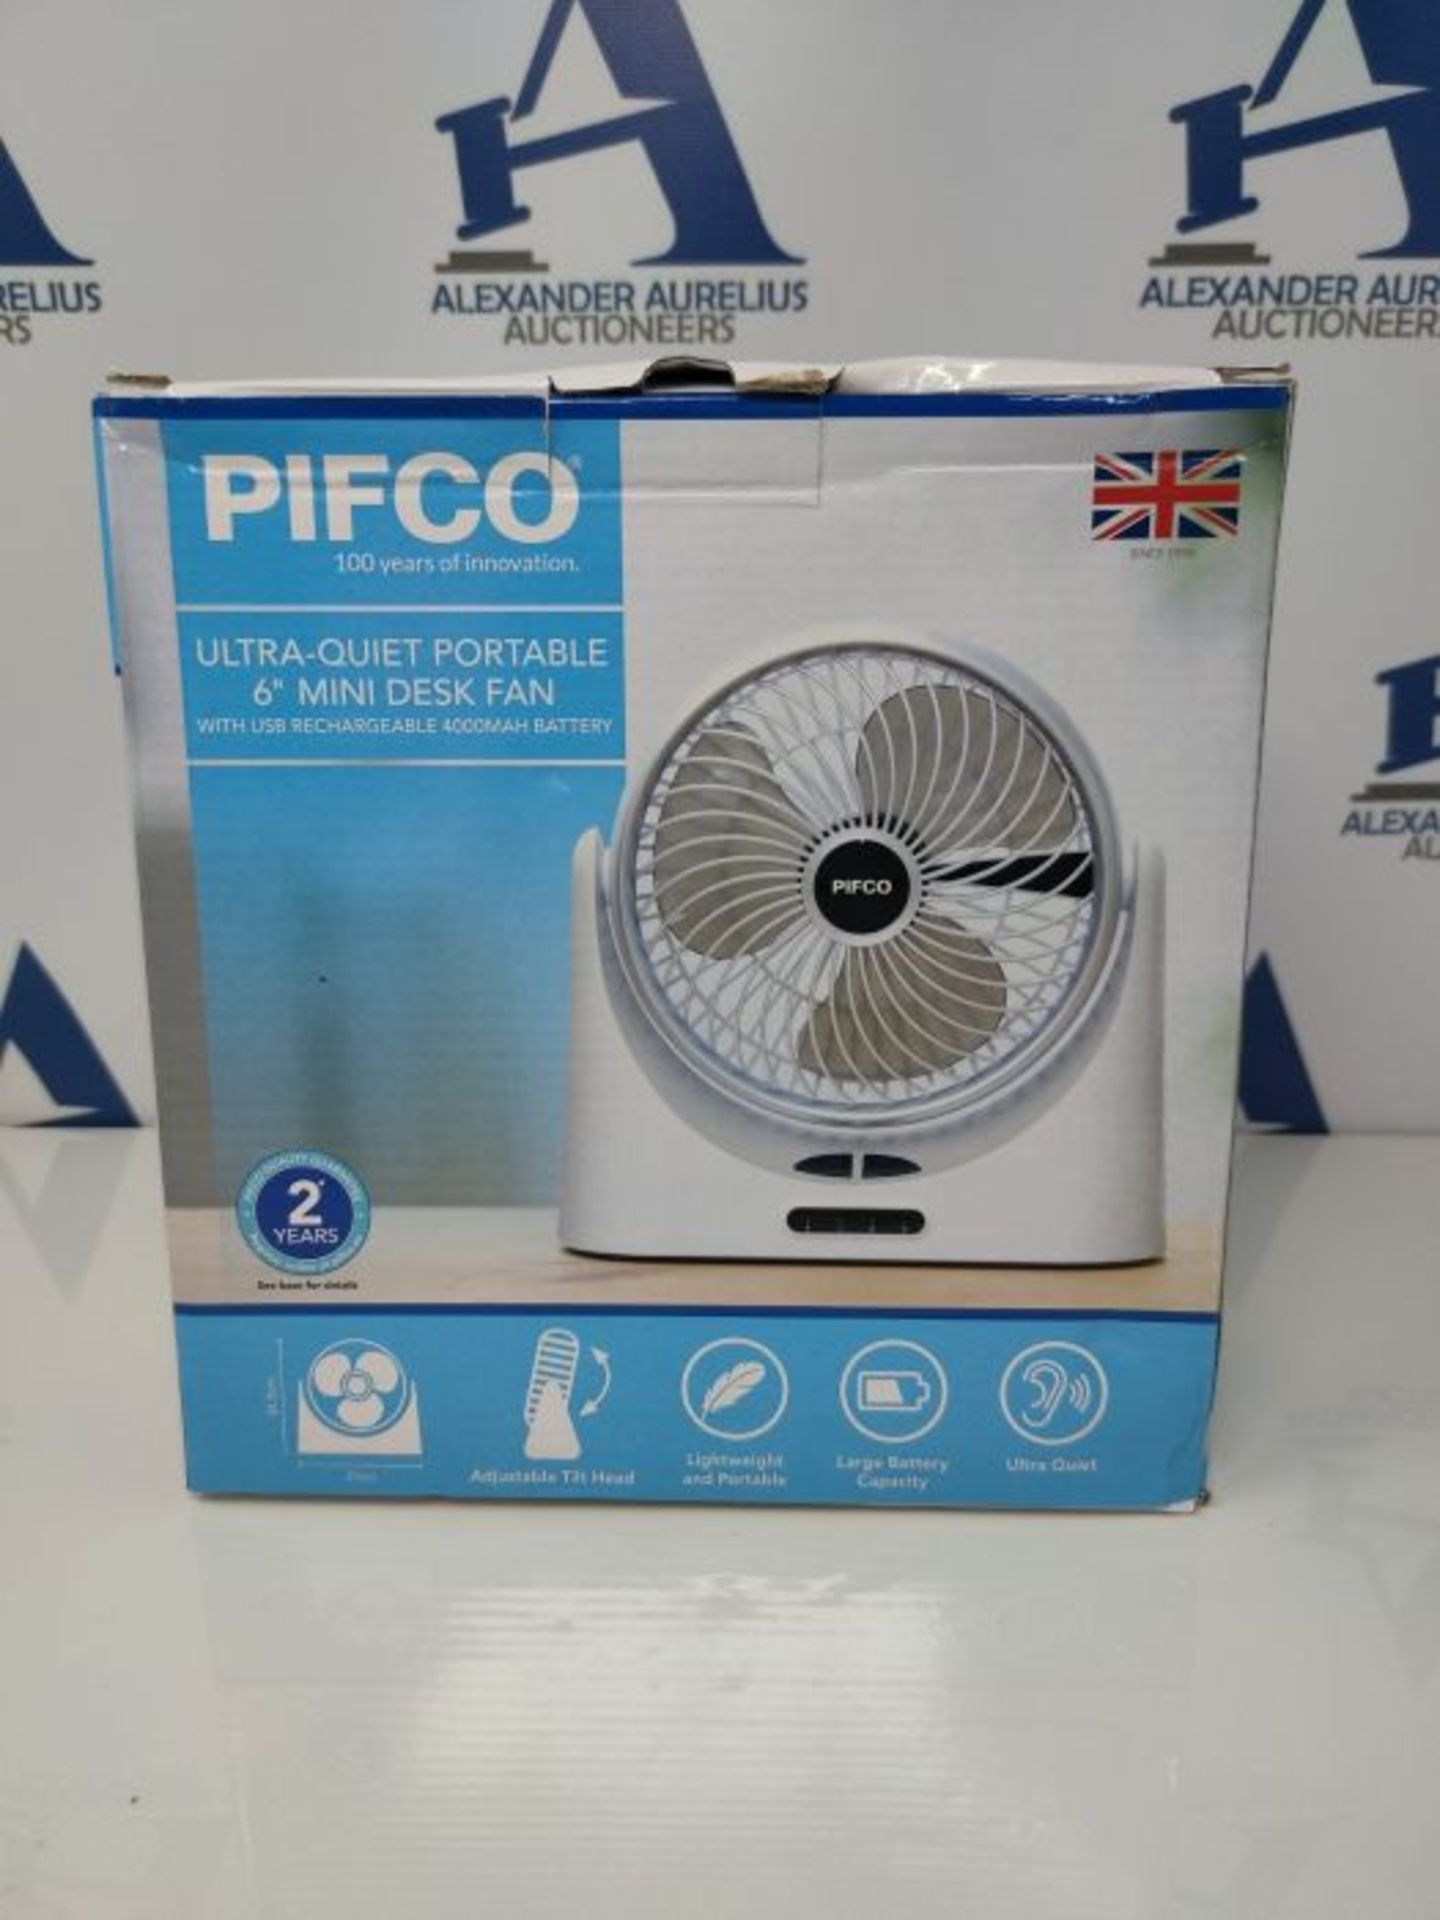 PIFCO P55004 Mini USB Fan, 3 Speed Settings, Adjustable Tilt Angle, 9.5 hours Runtime - Image 2 of 3